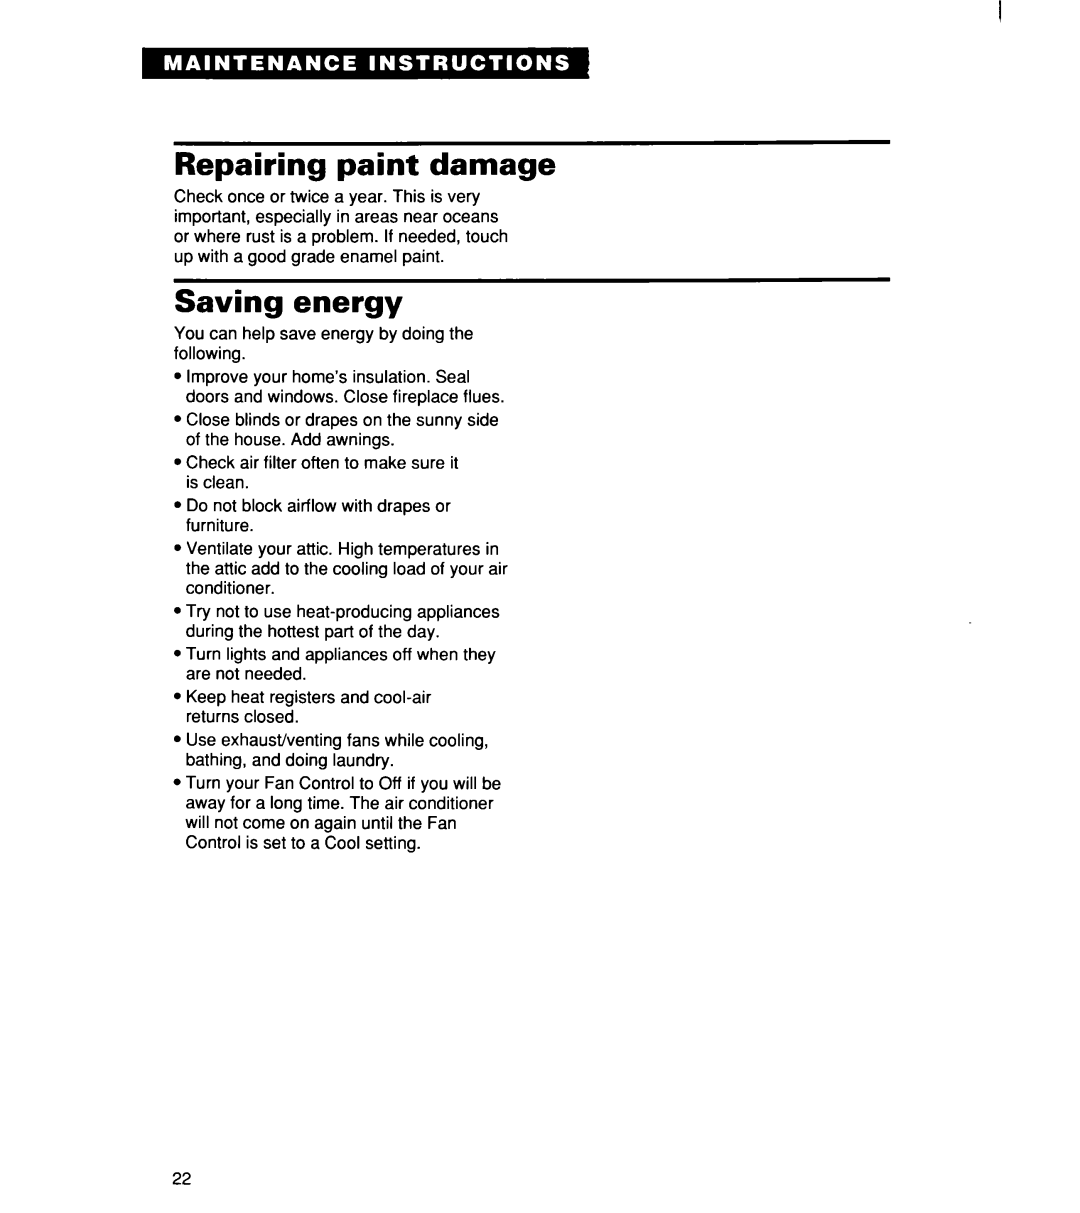 Whirlpool ACM244XE0, ACM 152XE0, ACM184XE0 important safety instructions Repairing paint damage, Saving energy 